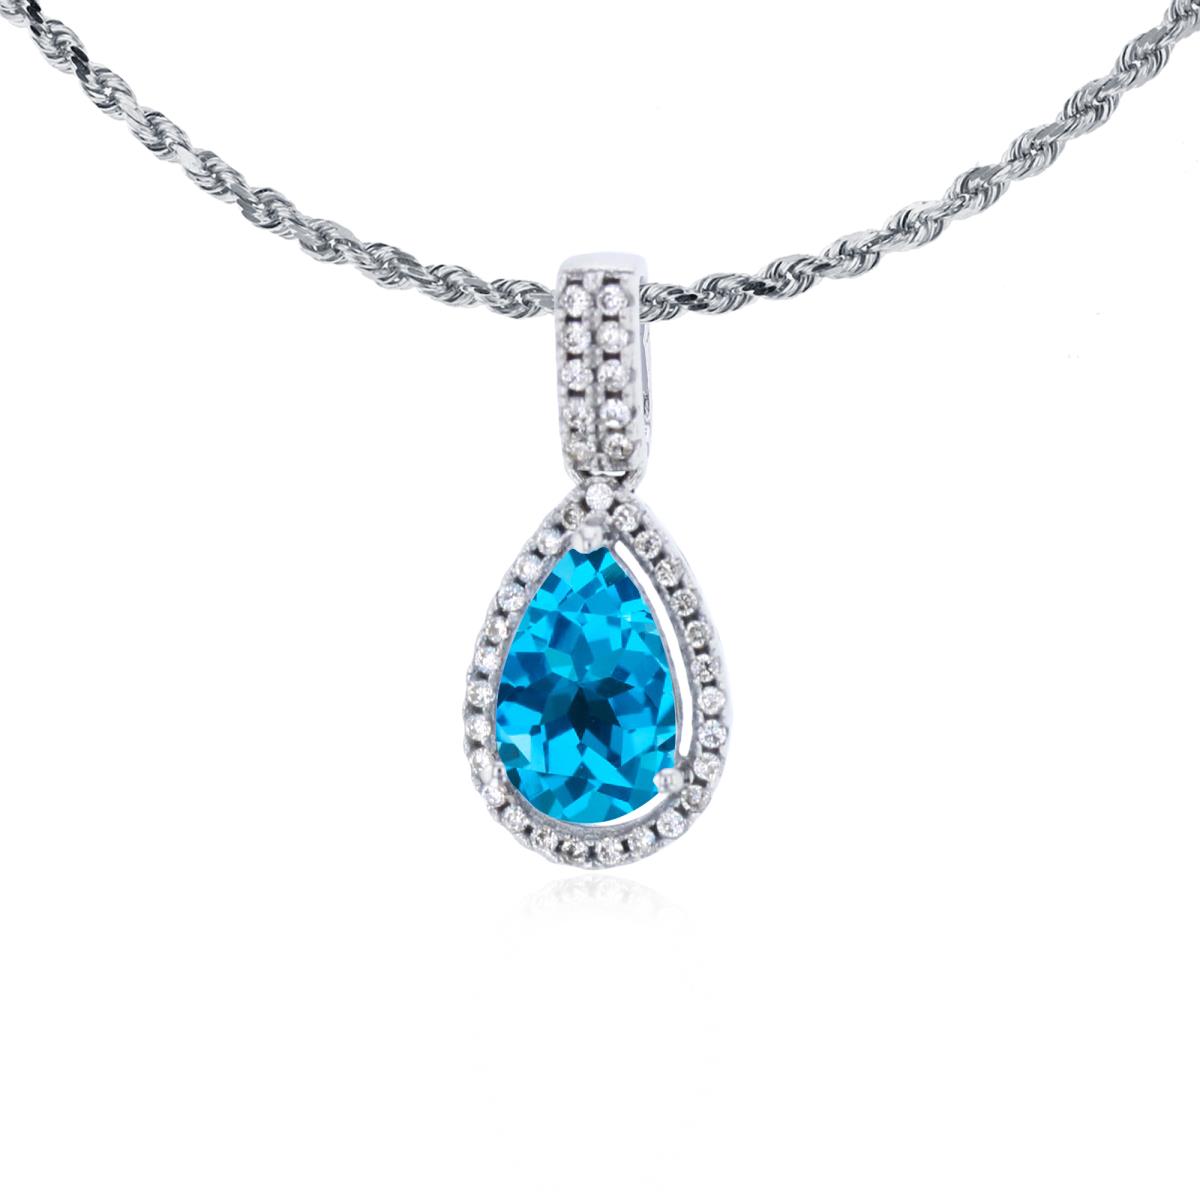 10K White Gold 8x5mm Pear Cut Swiss Blue Topaz & 0.11 CTTW Diamond Halo 18" Rope Chain Necklace